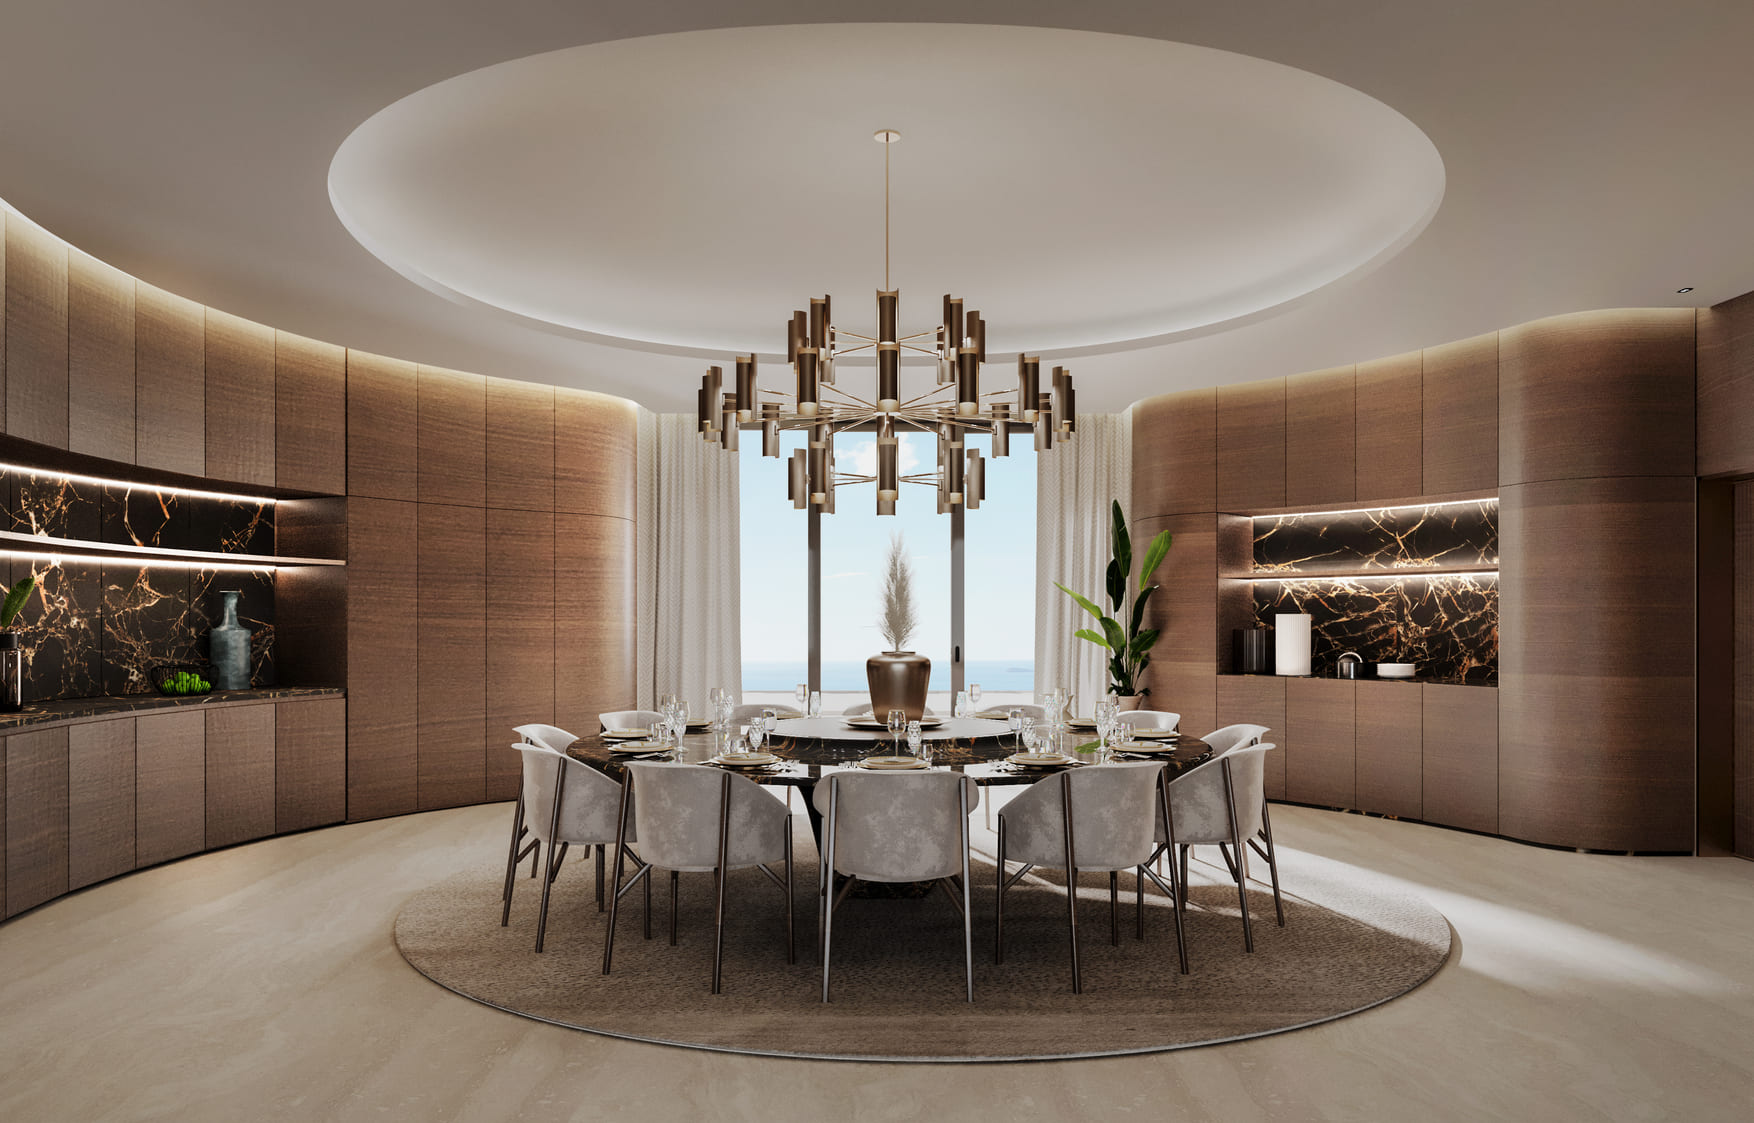 This image shows a modern dining room with a large, circular dining table set for eight. The chairs are upholstered in a plush material, and the table is set with plates, glasses, and cutlery. A striking chandelier hangs above, and the room features a contemporary design with a neutral color palette. The back wall is adorned with marble accents and backlit panels, creating a luxurious ambiance. Decorative plants add a touch of greenery to the space.